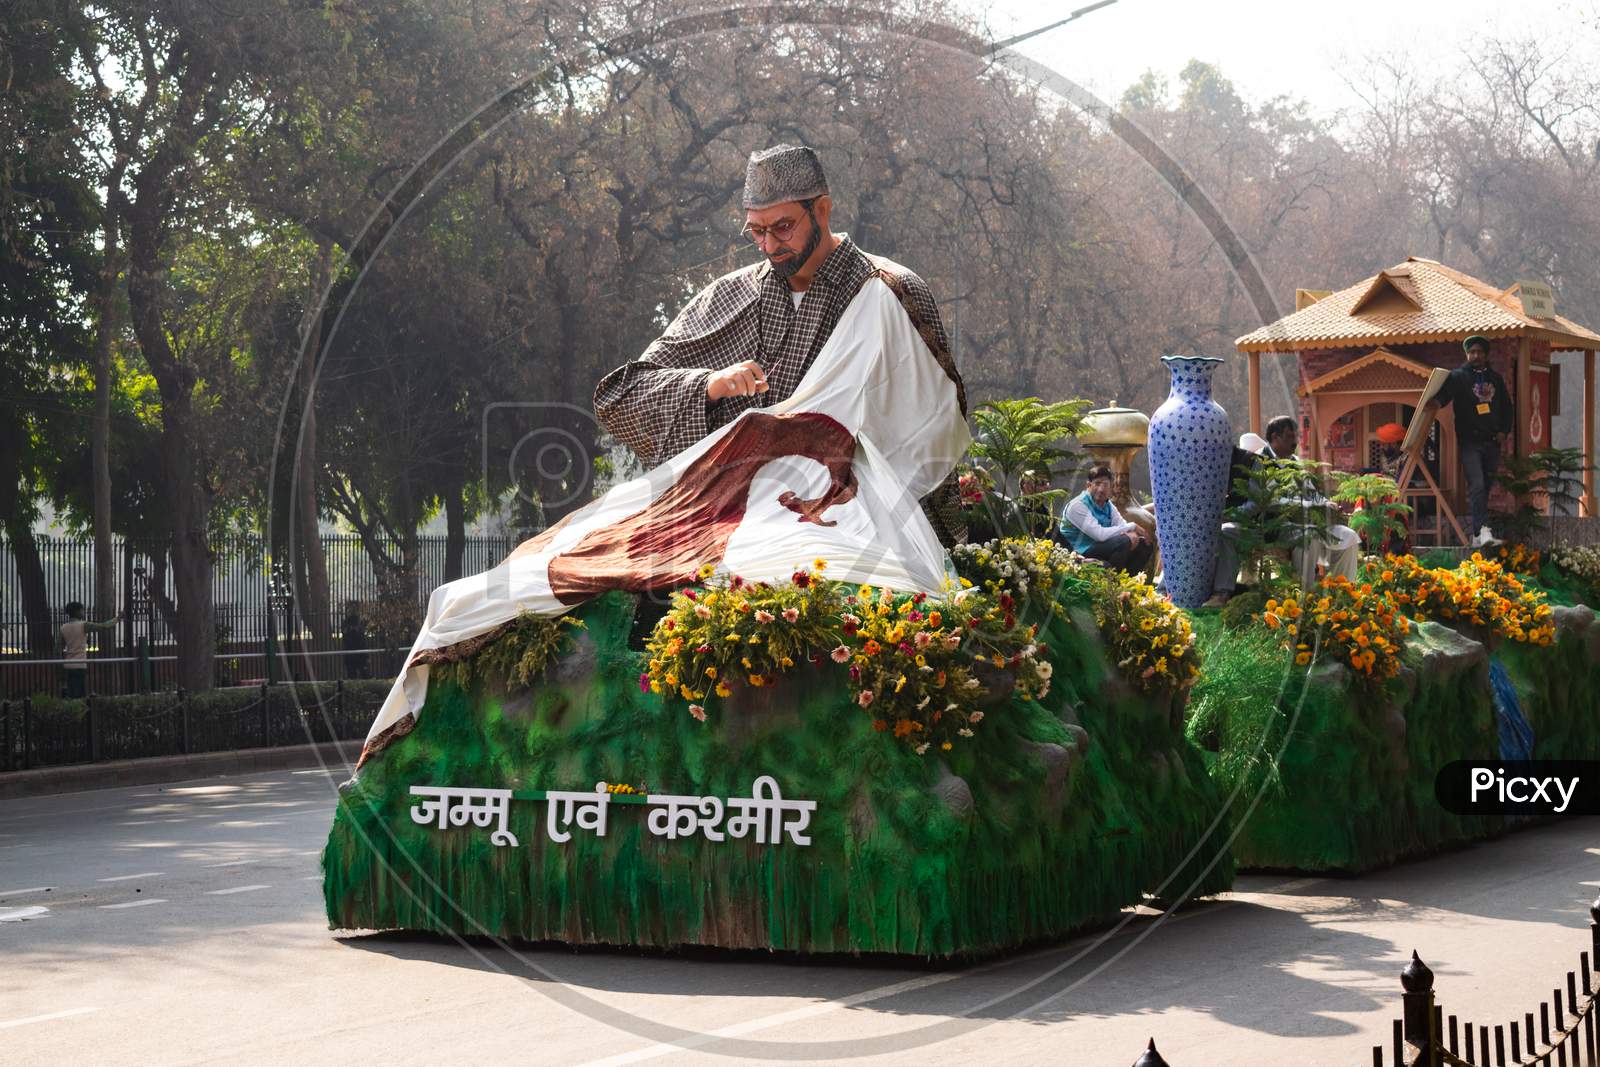 Tableau Of Jammu and Kashmir Shows Culture Of the union territory On 71st Republic Day 2020